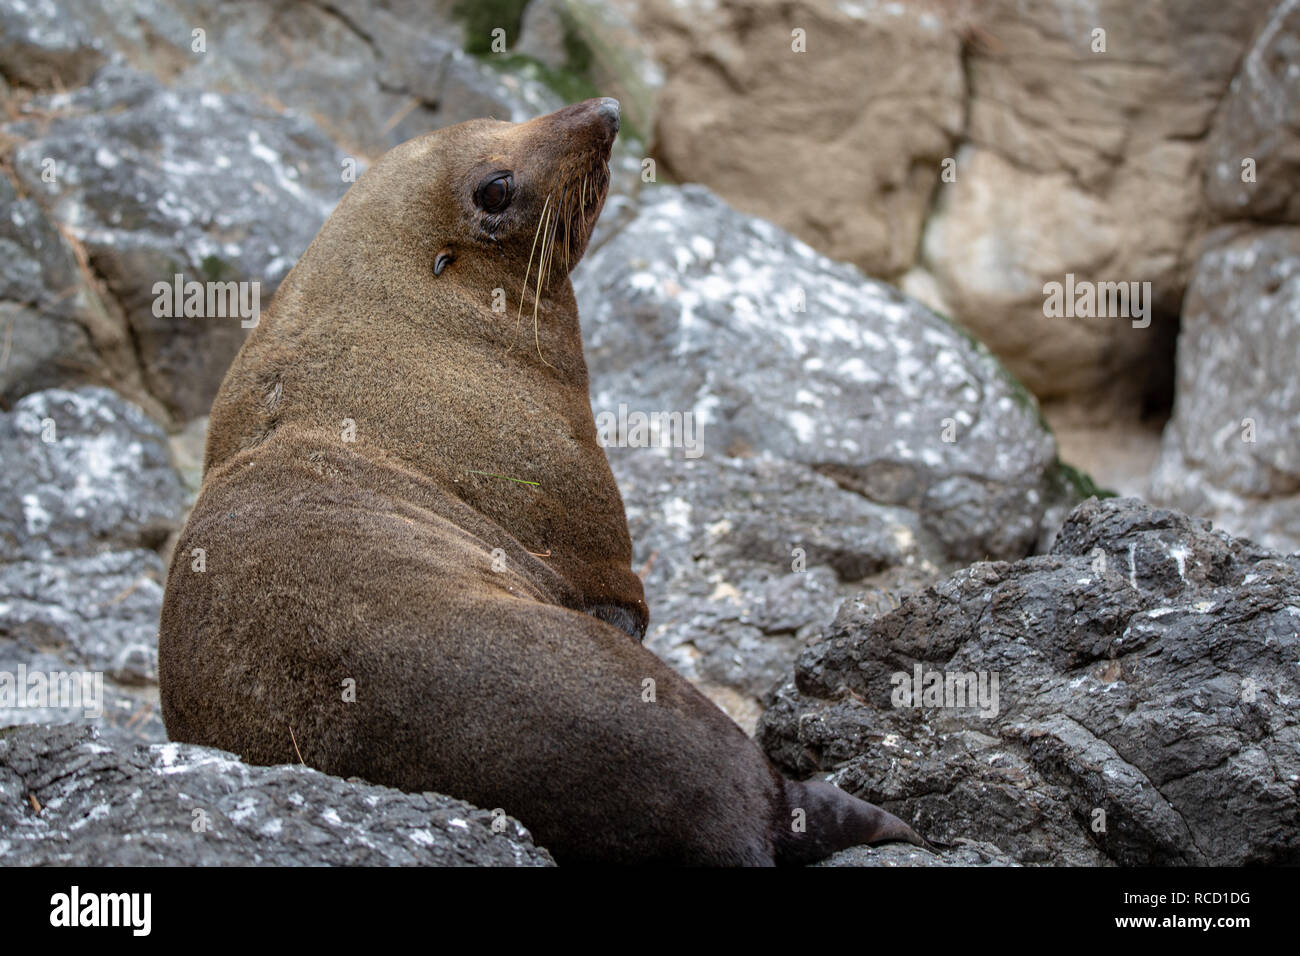 A seal rests on the rocky shore at the Pohatu Marine Reserve, Flea Bay, New Zealand Stock Photo